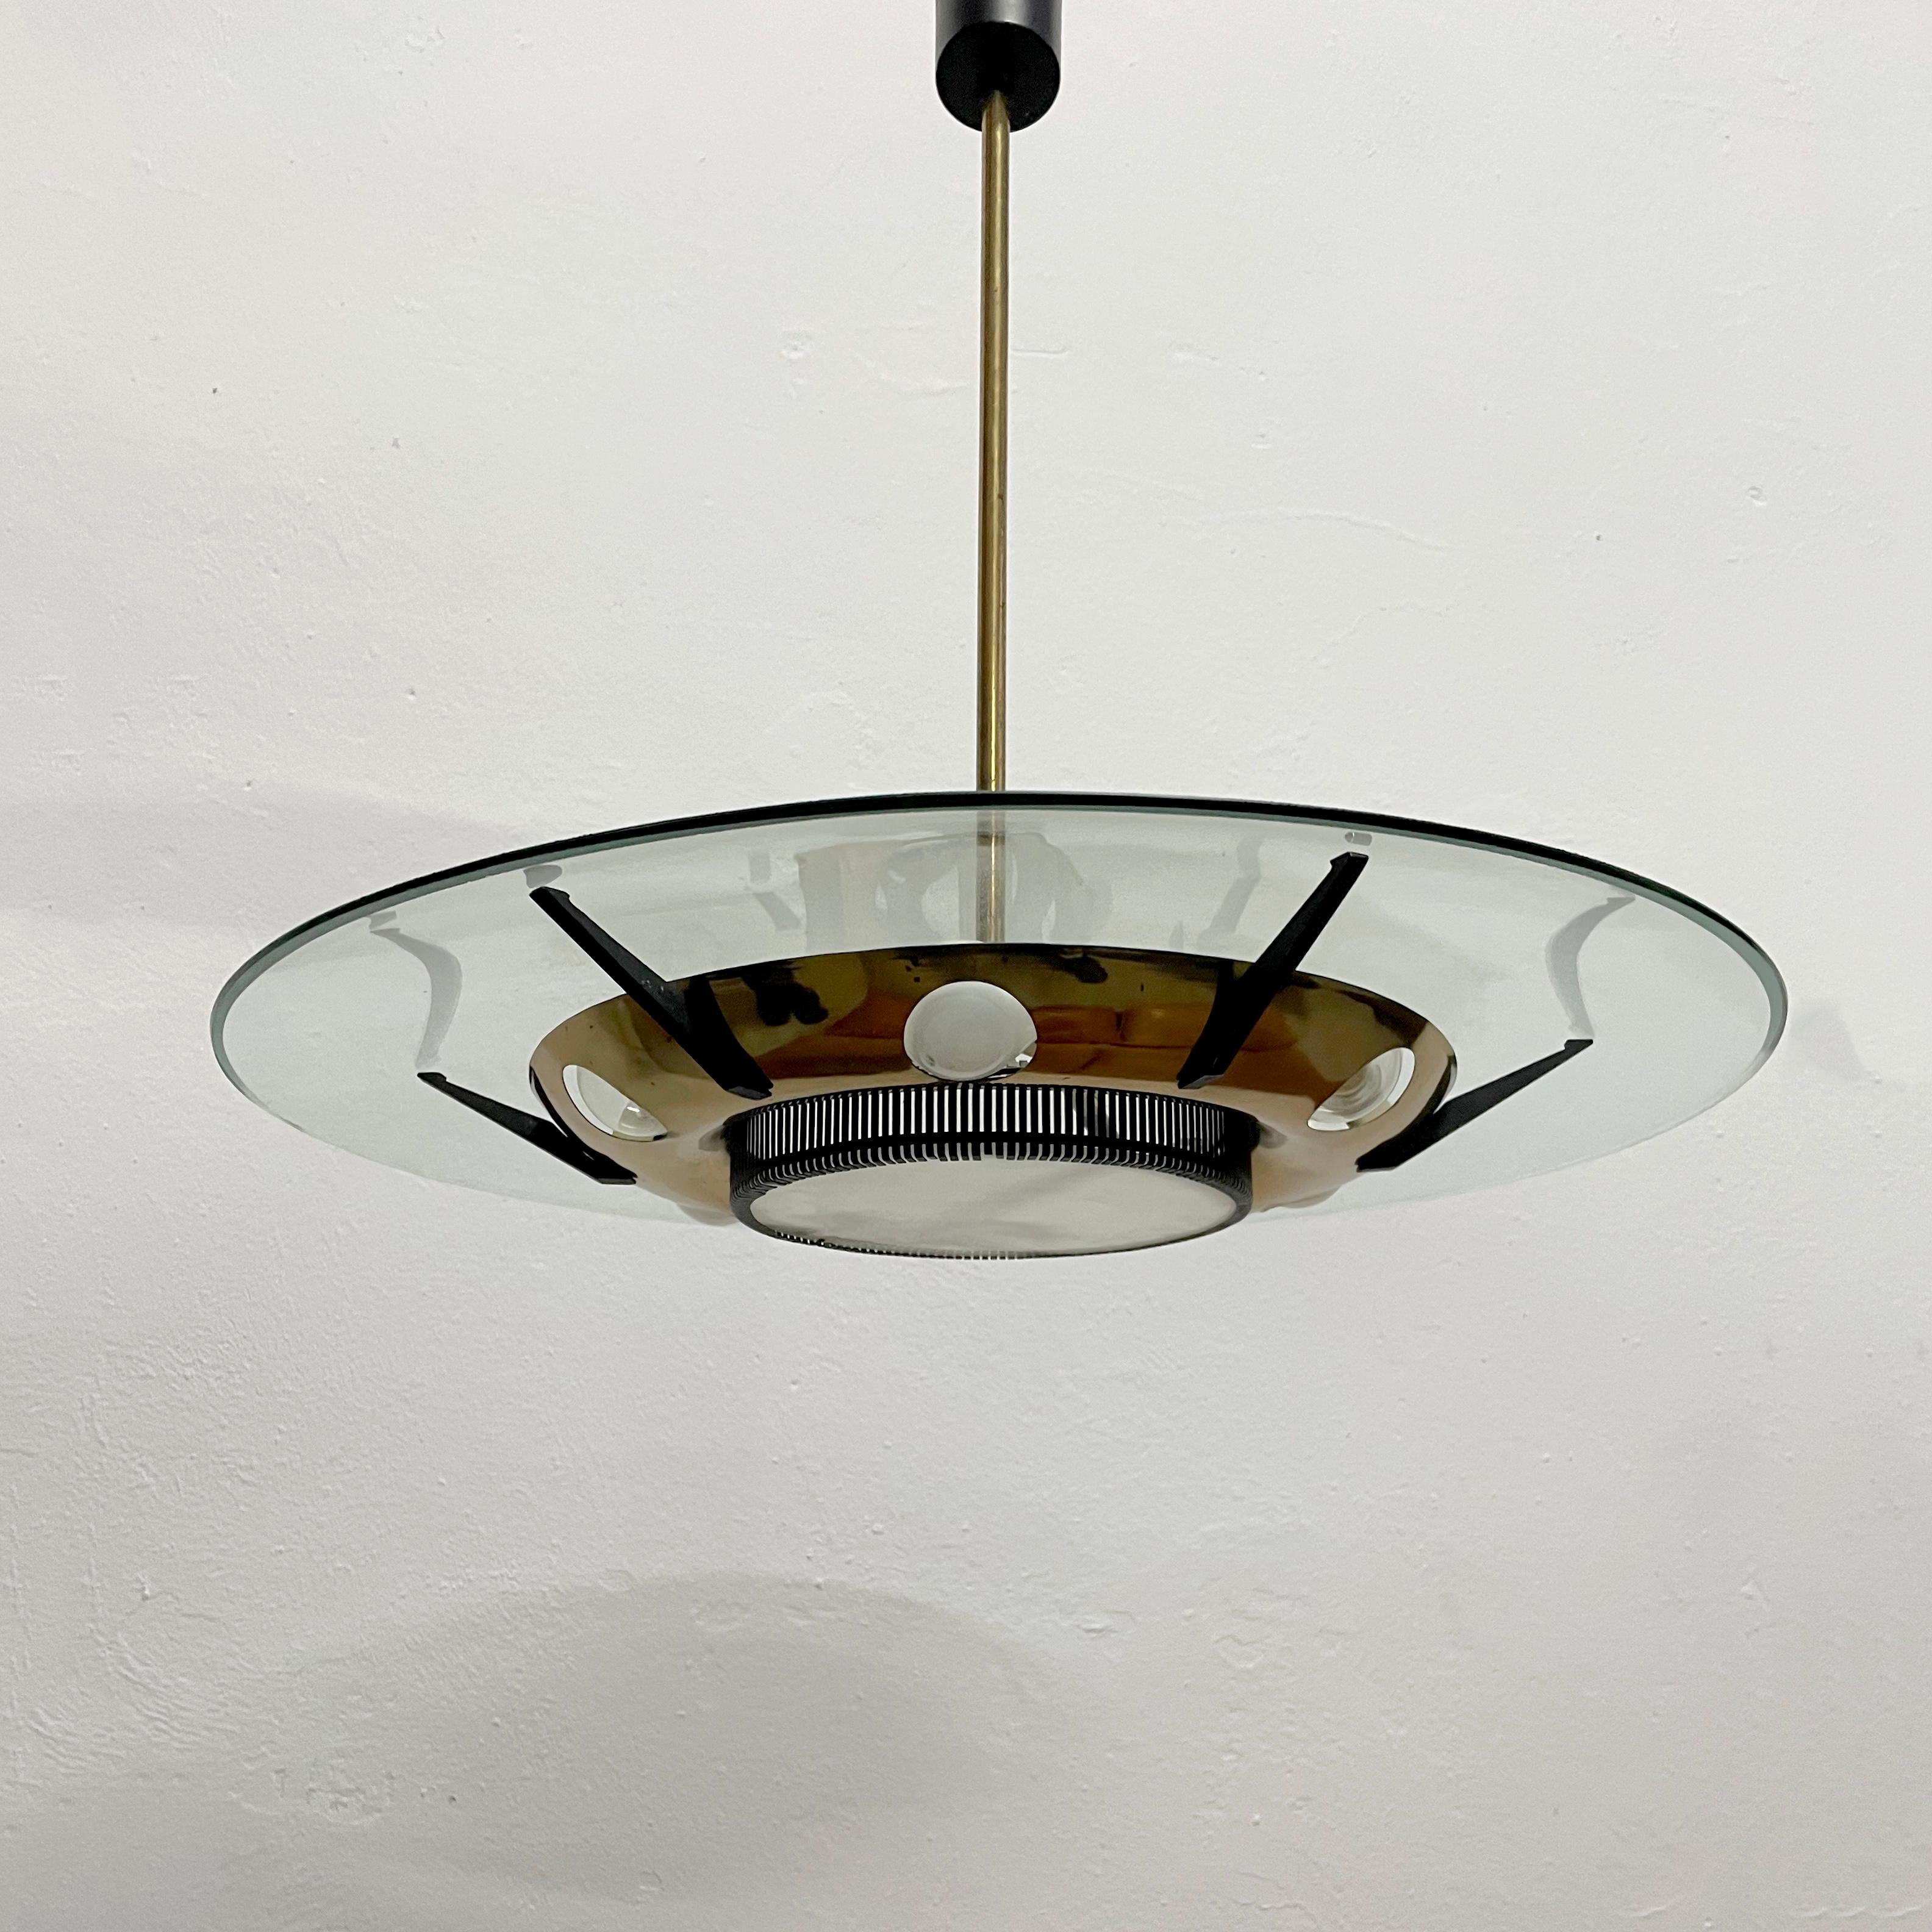 Offered for sale is a rare 1950s chandelier by Stilnovo in very good original condition.

This stunning chandelier is made of glass, brass, and black lacquered metal. The brass petal that connects the light to the ceiling has two parts and by